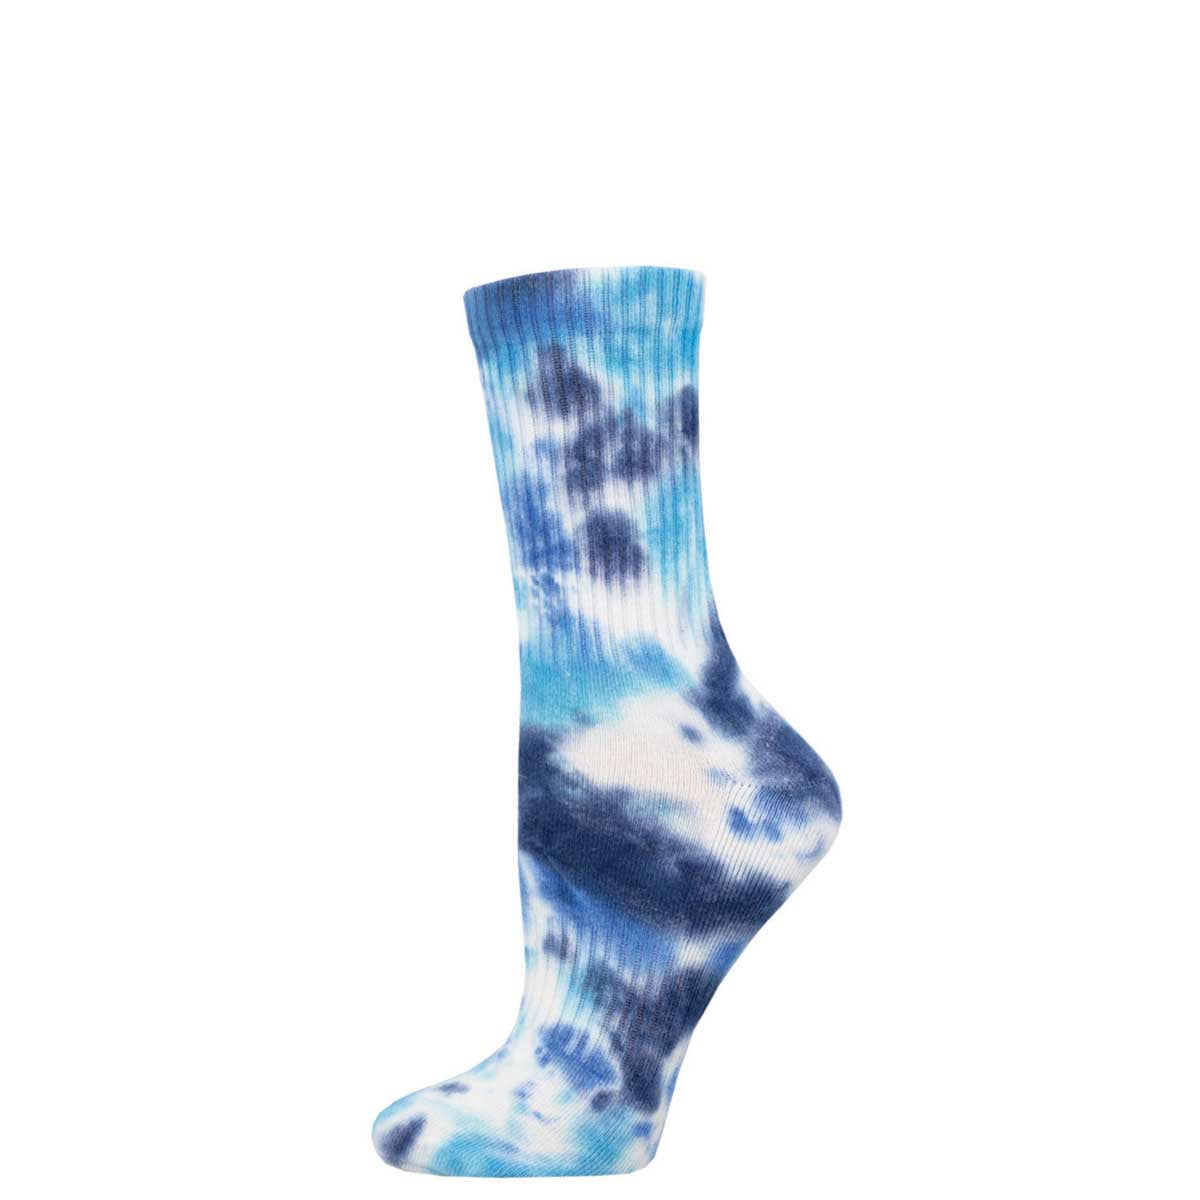 Colorful Tie-Dye Socks for Women and Men